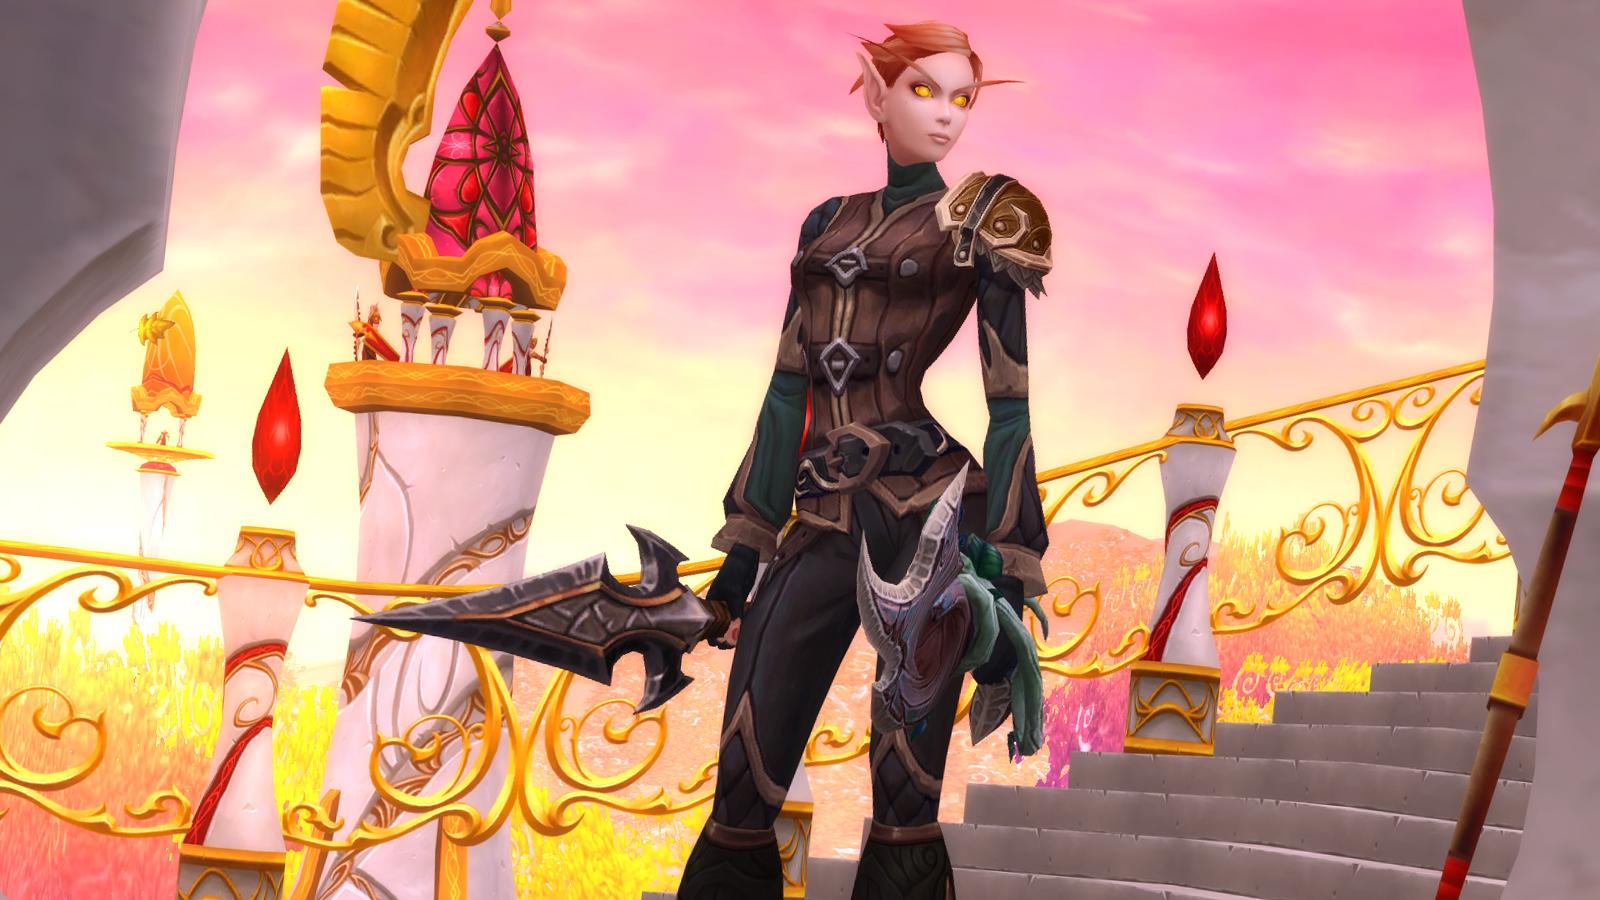 Blood Elf standing on the landing character creation screen in Shadowlands